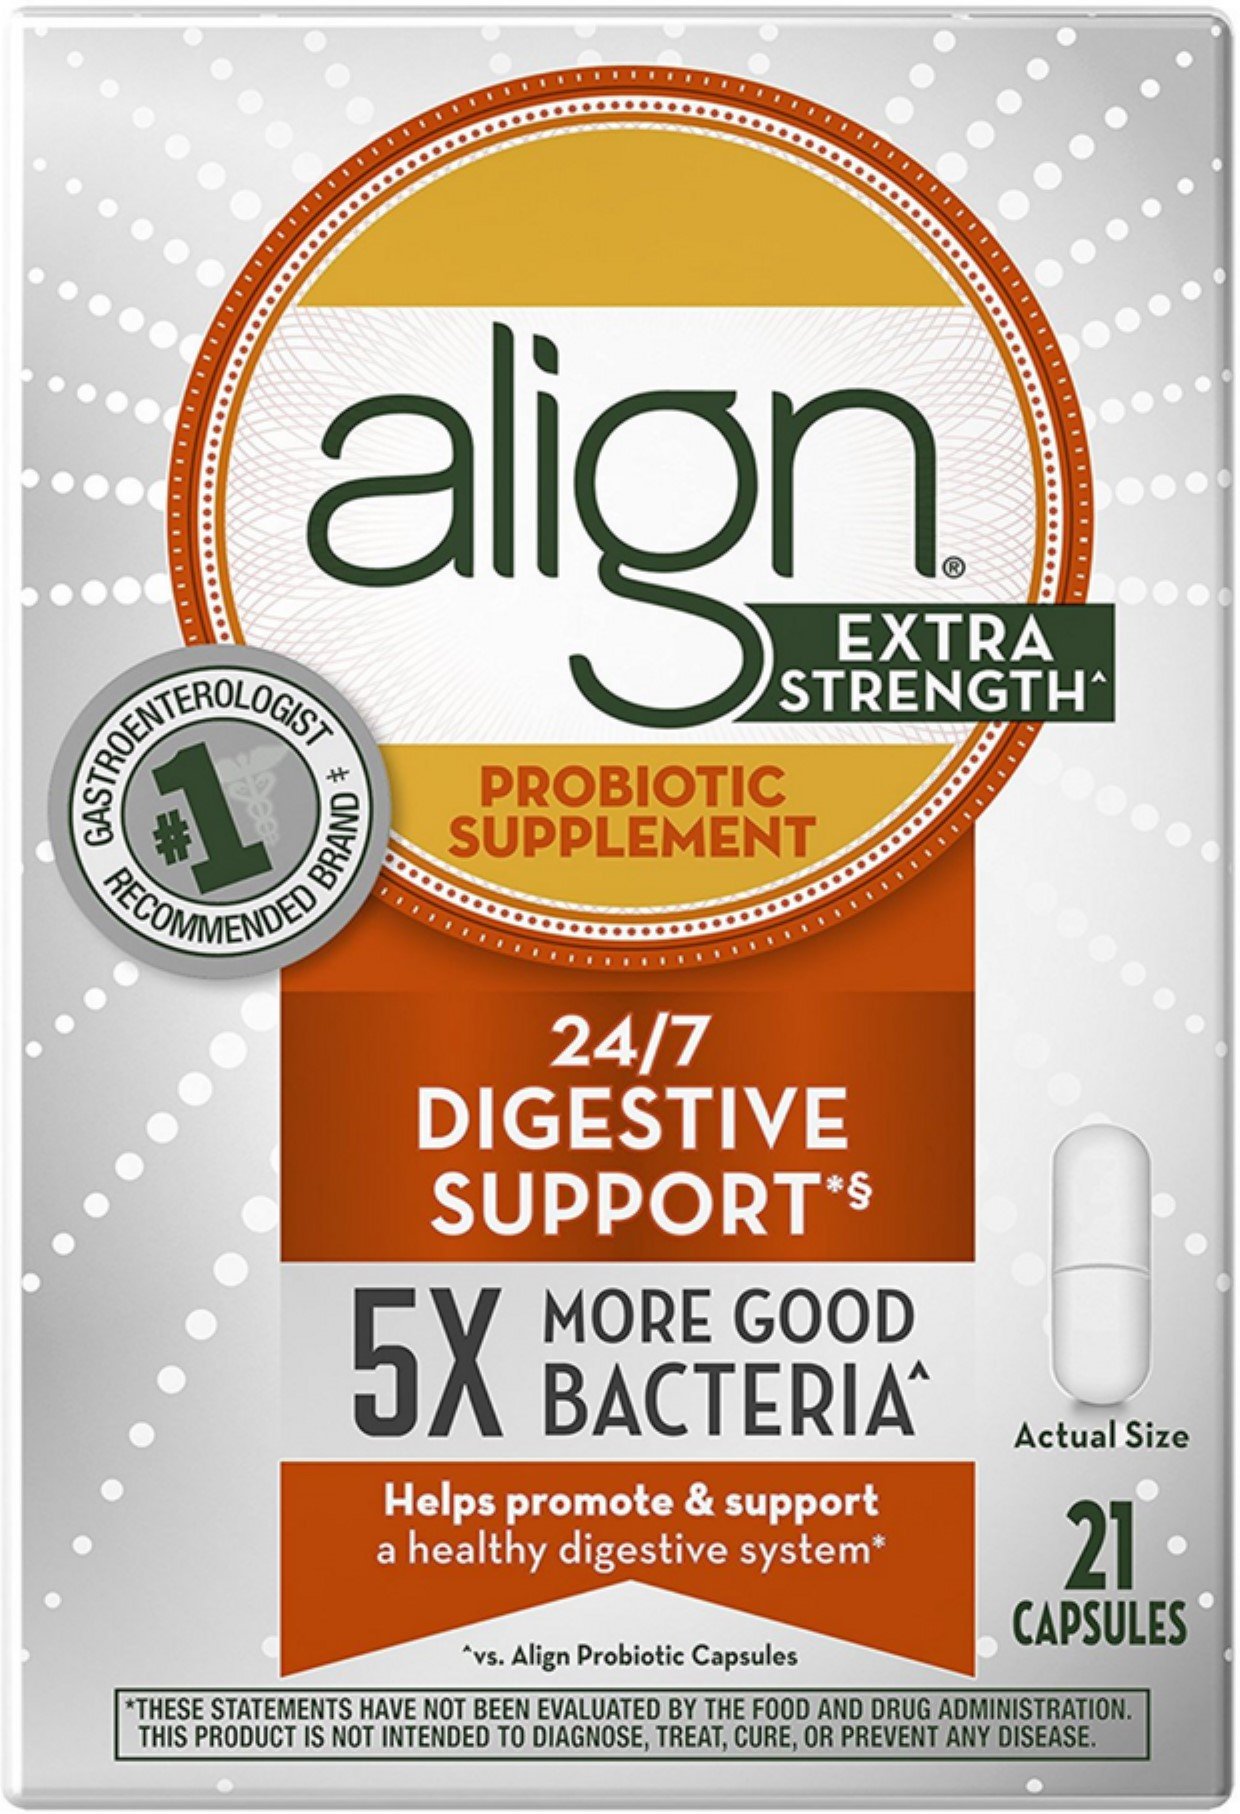 Align Extra Strength Daily Probiotic Supplement ...